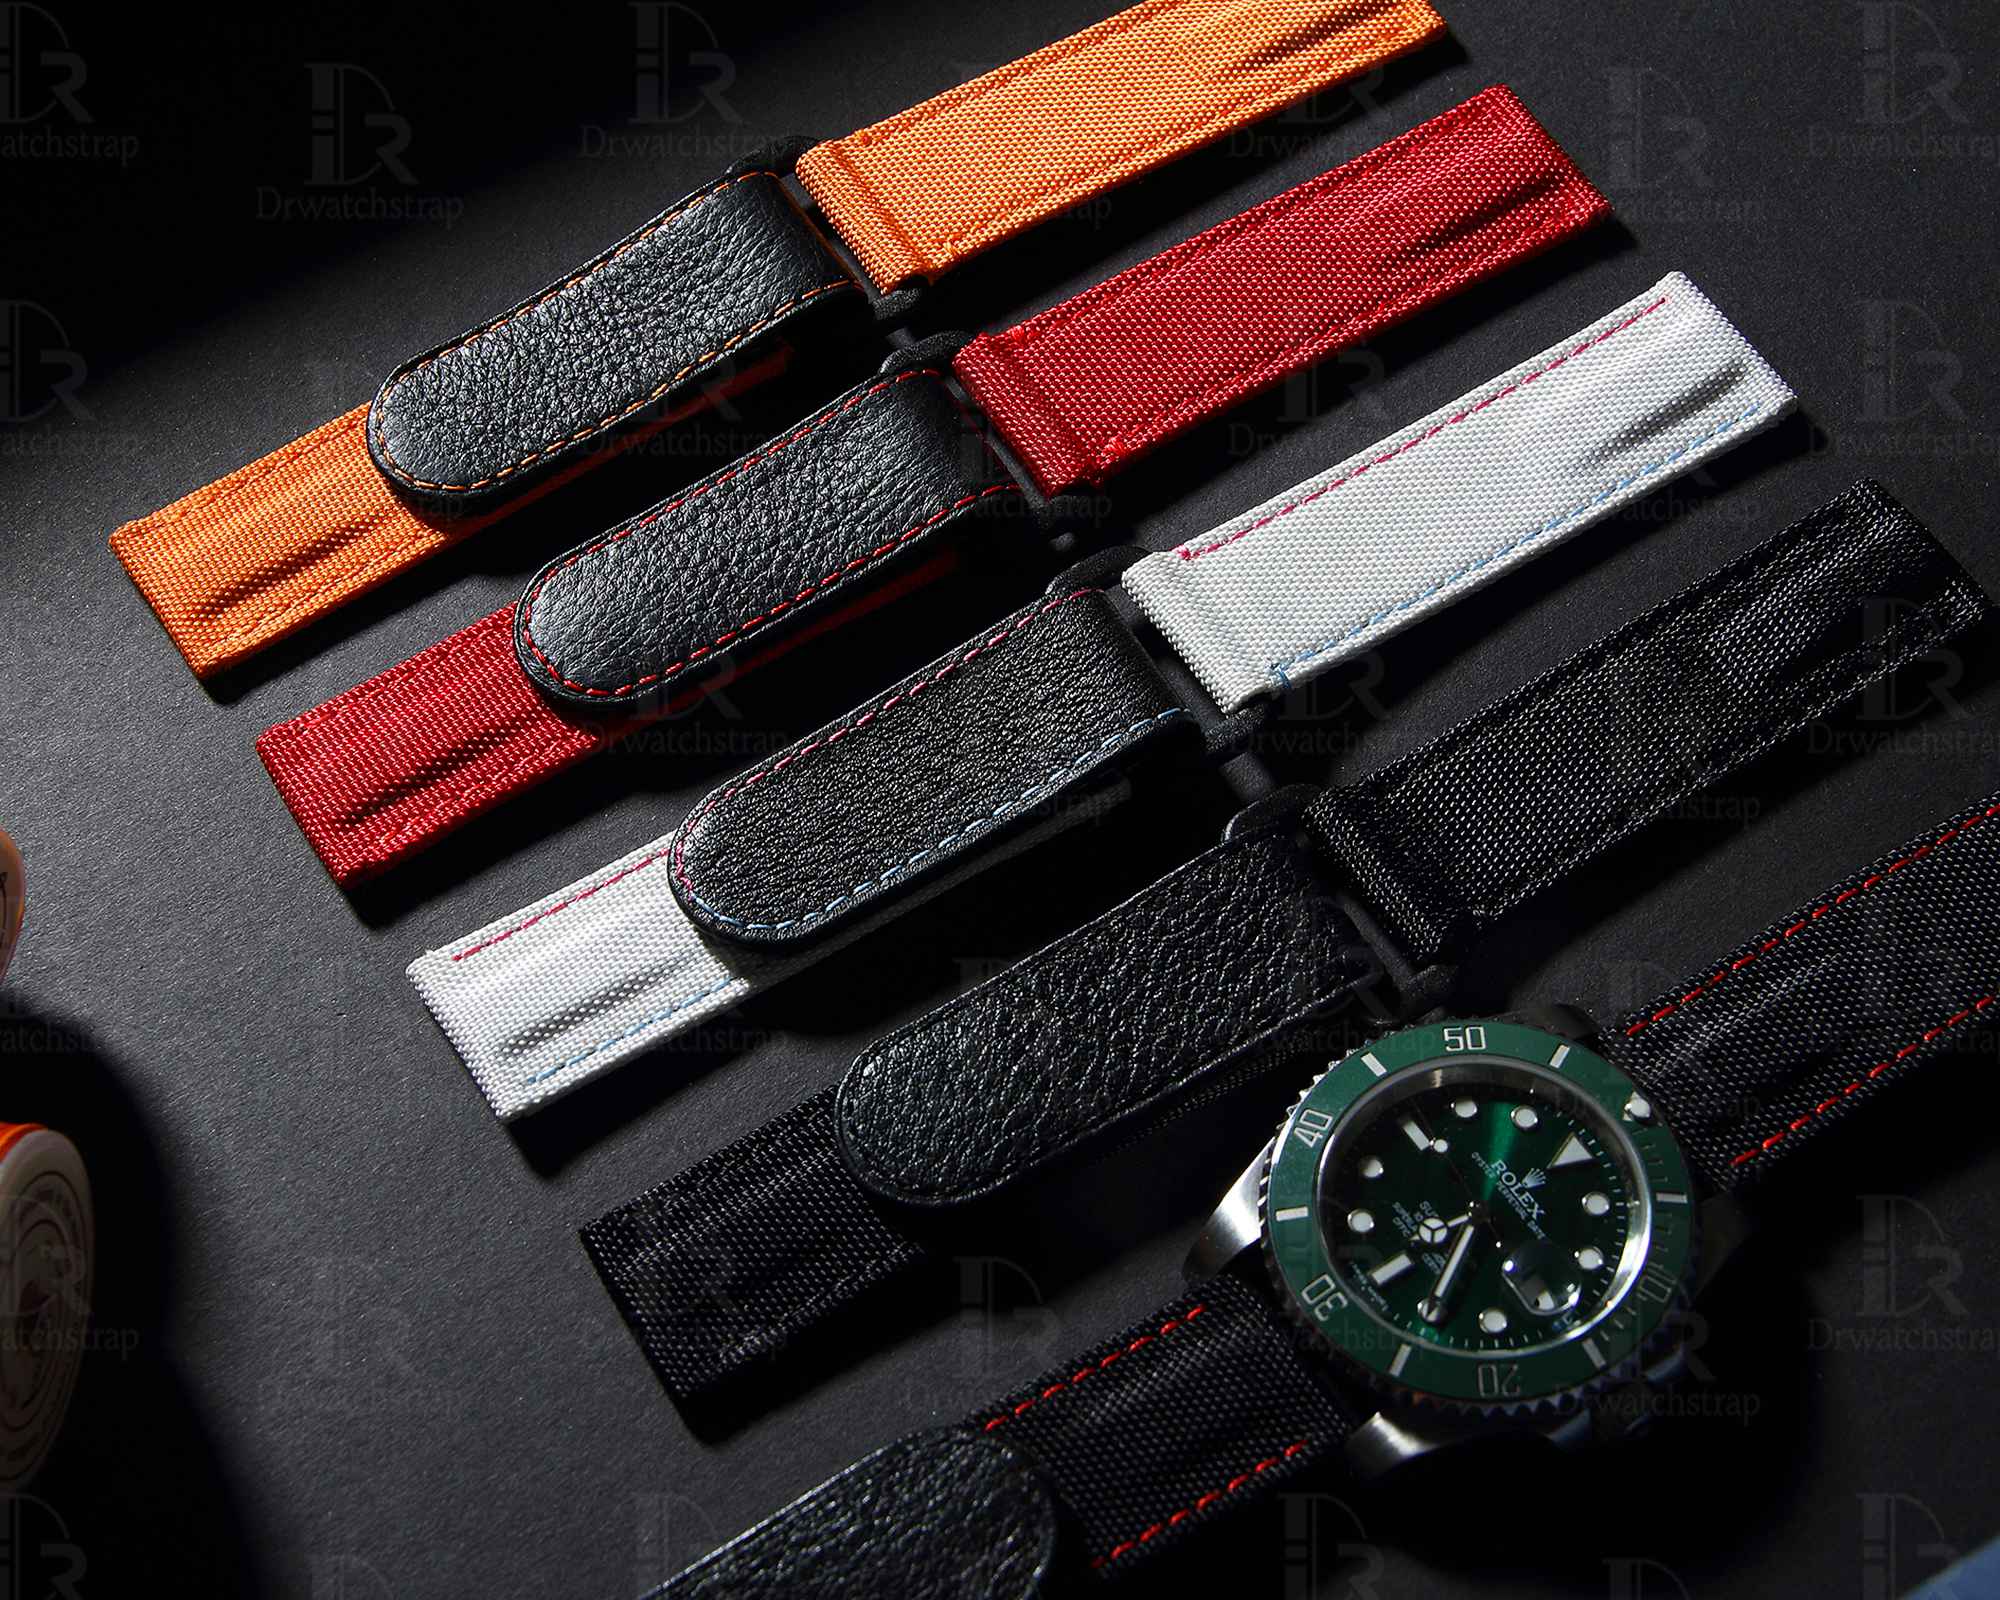 Rolex Velcro watch strap replacement 20mm canvas black blue green yellow red orange watchbands for Rolex Omega Patek Philippe Blancpain sailcloth Canvas nylon straps online